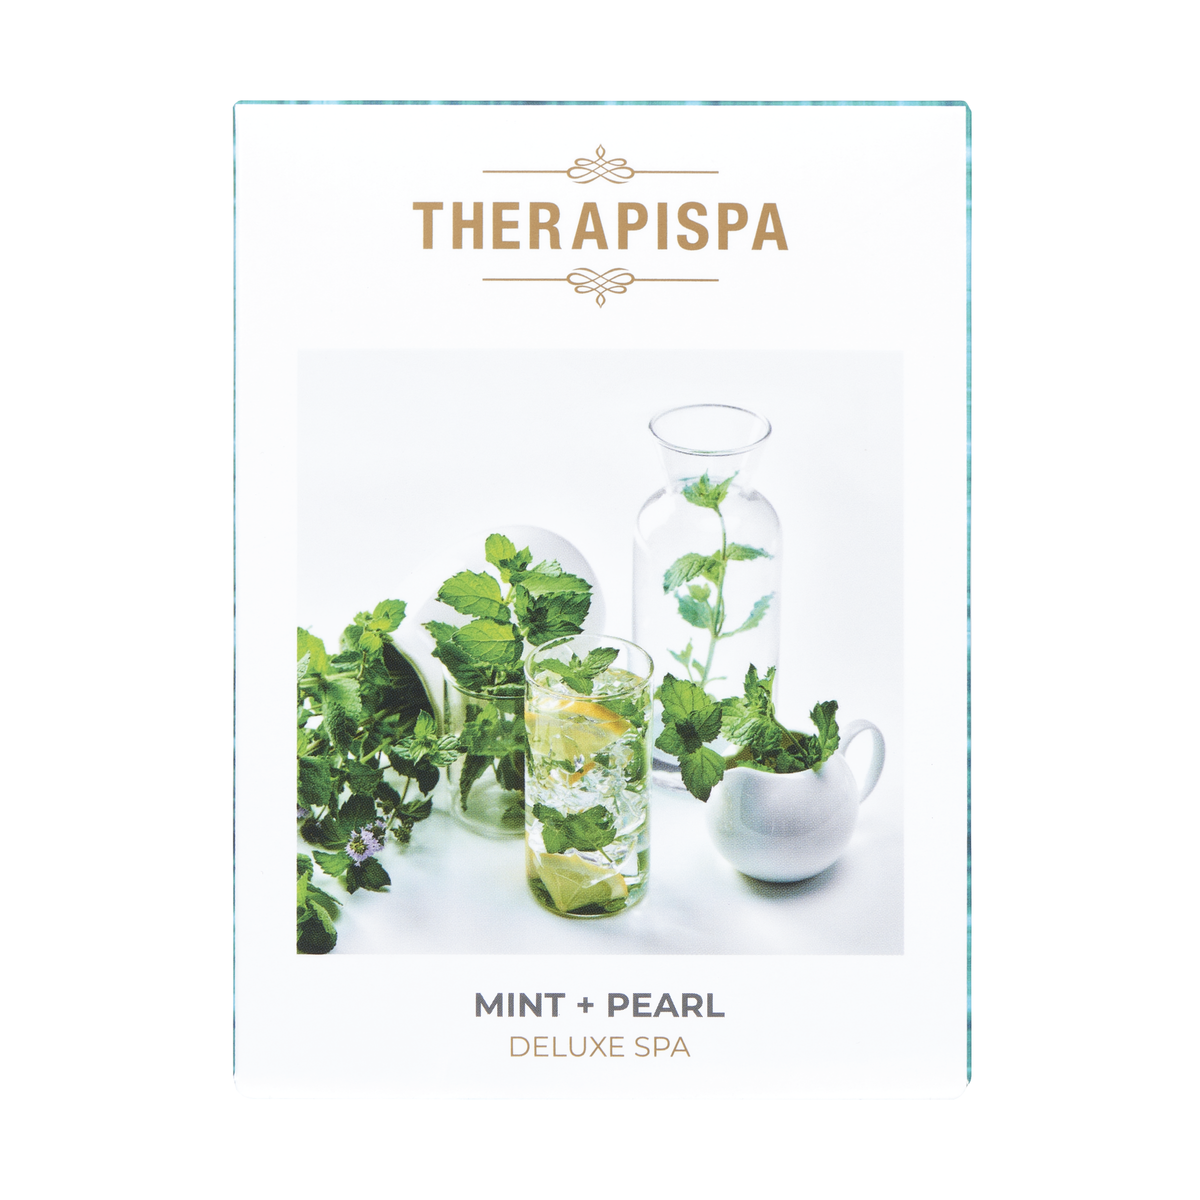 Deluxe Spa Kit / Mint + Pearl